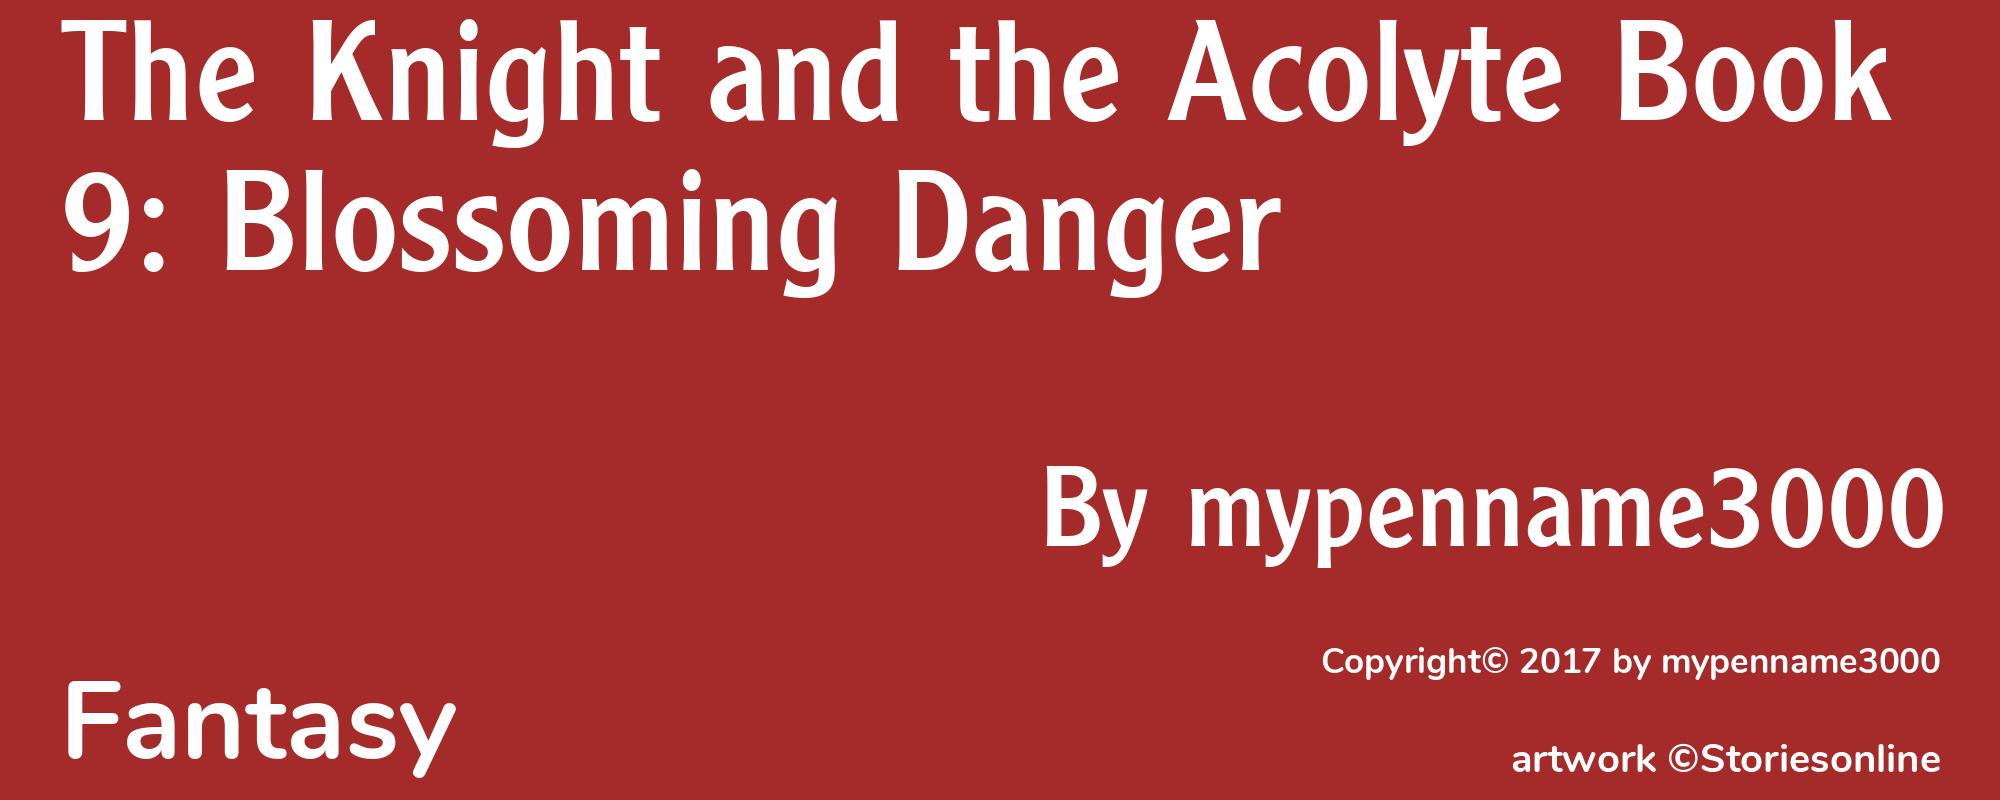 The Knight and the Acolyte Book 9: Blossoming Danger - Cover